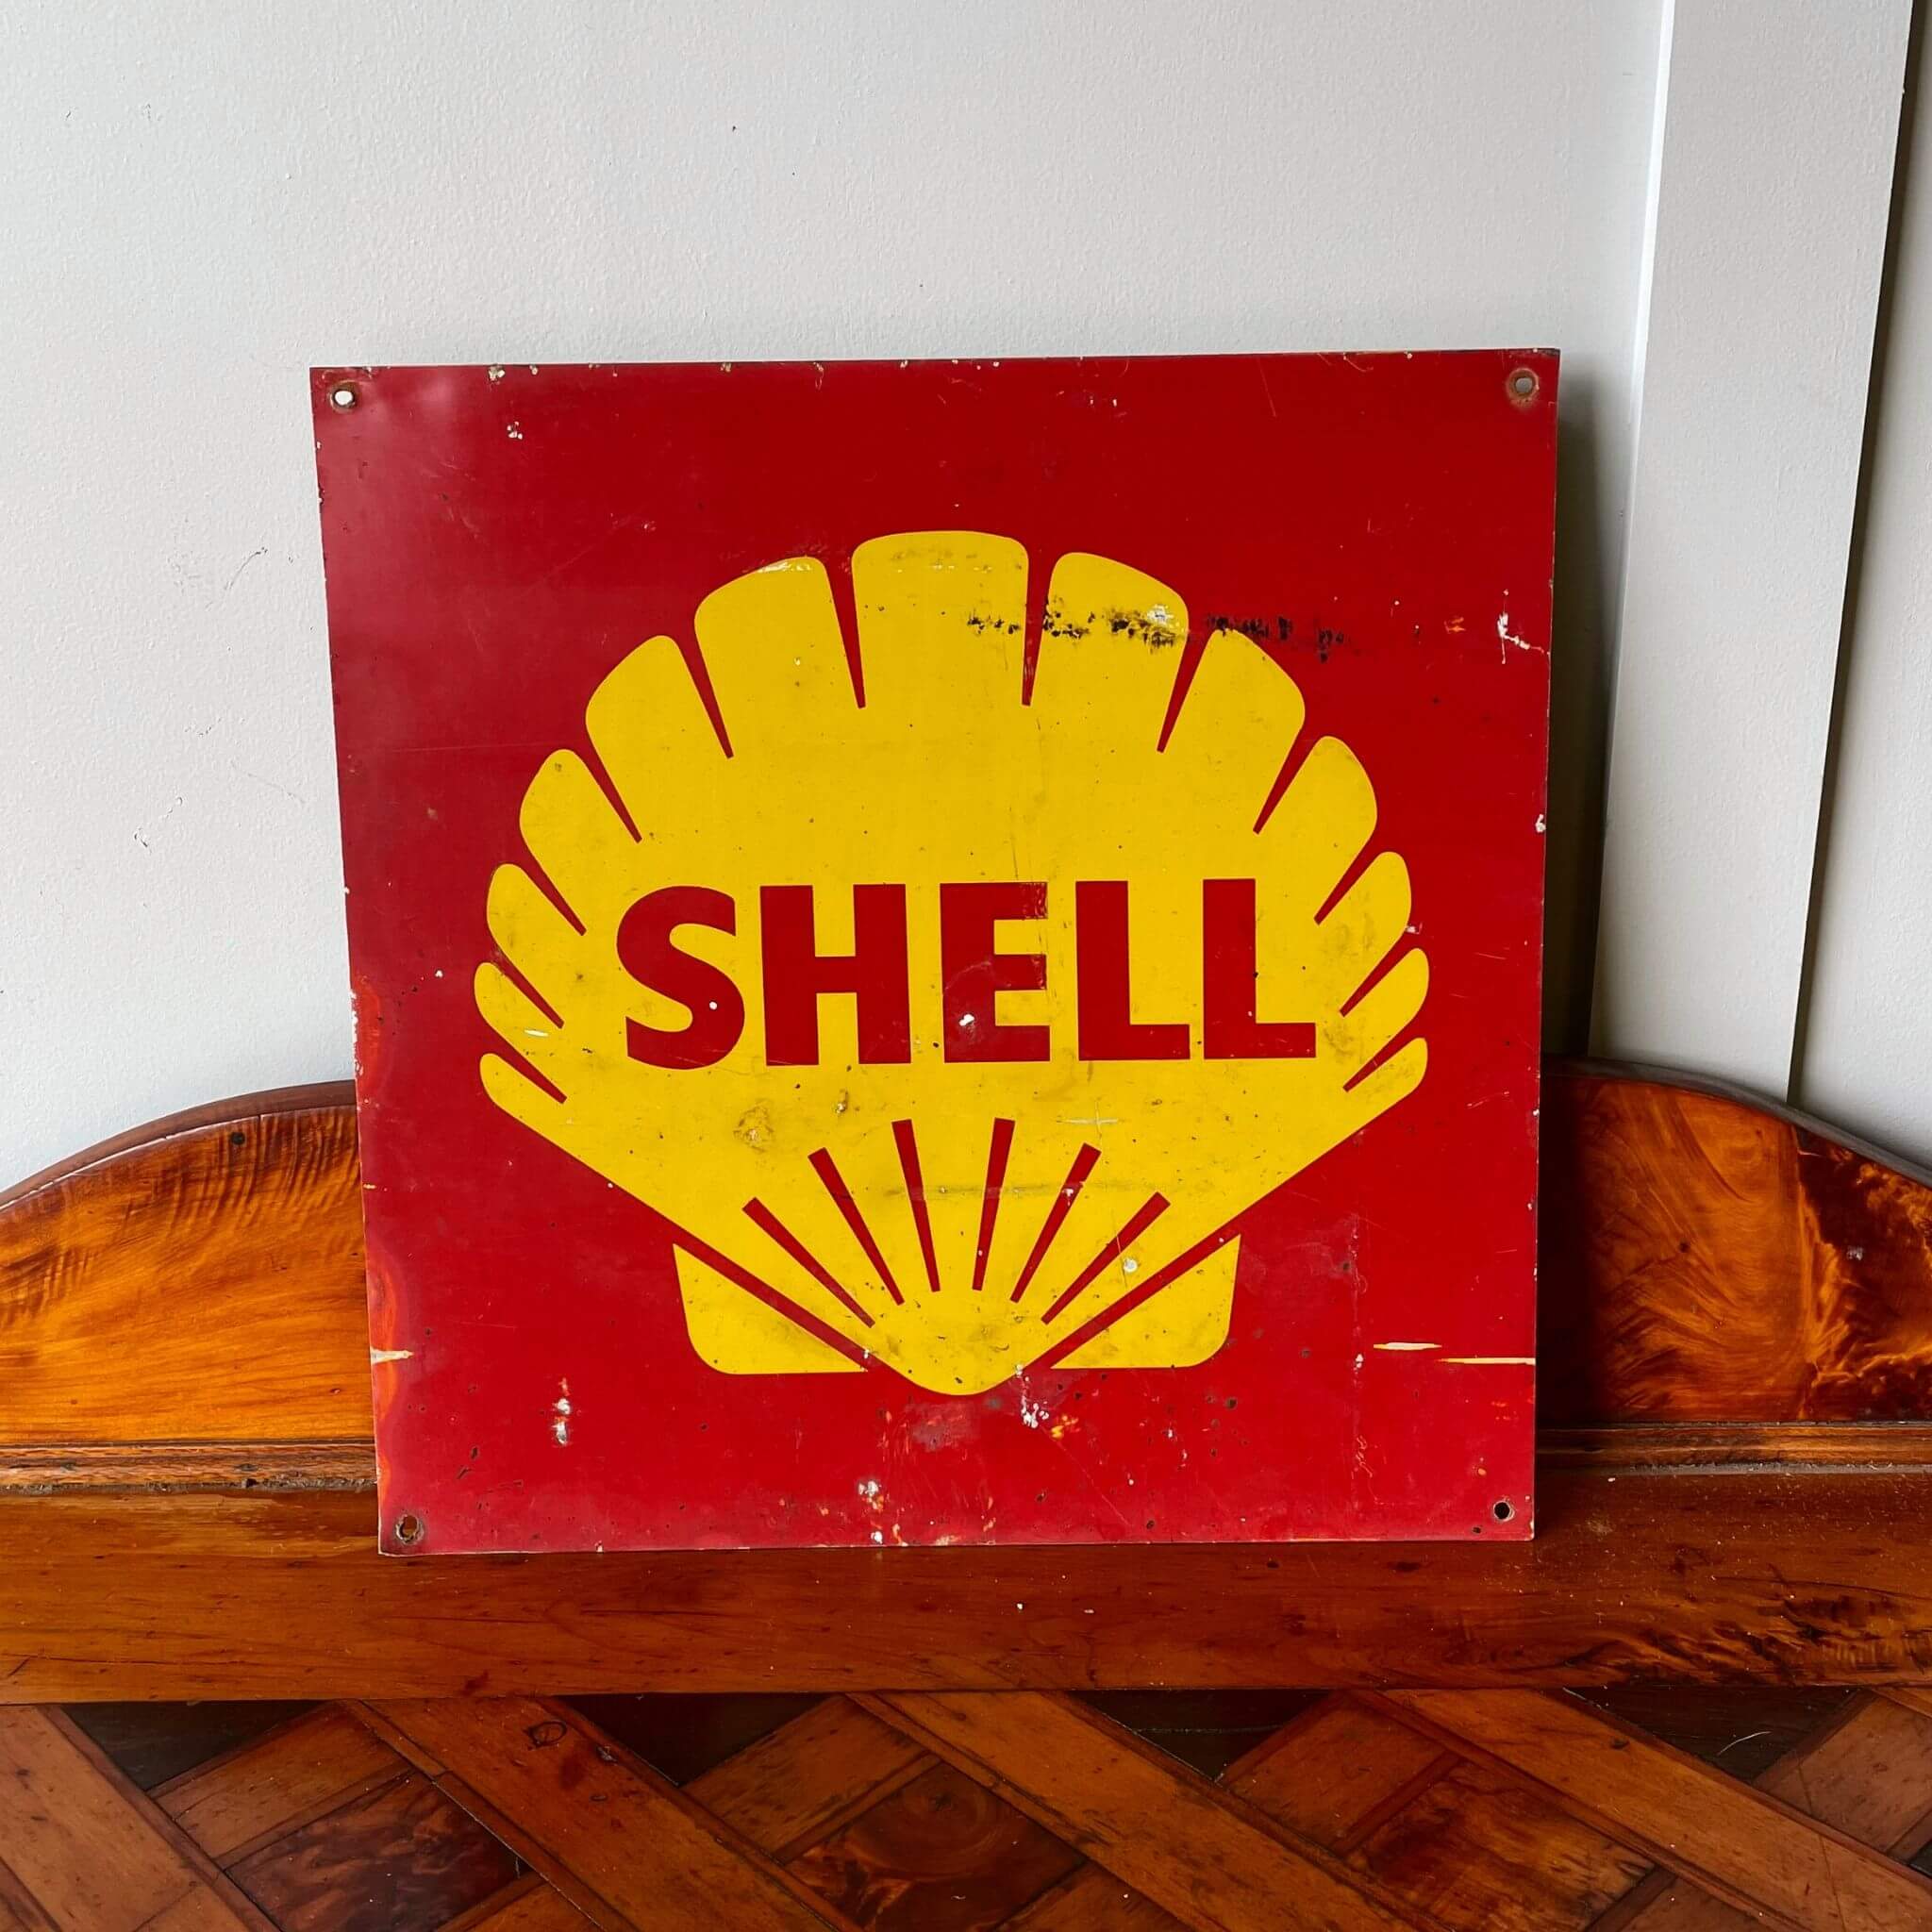 A vintage advertising shell bowser sign